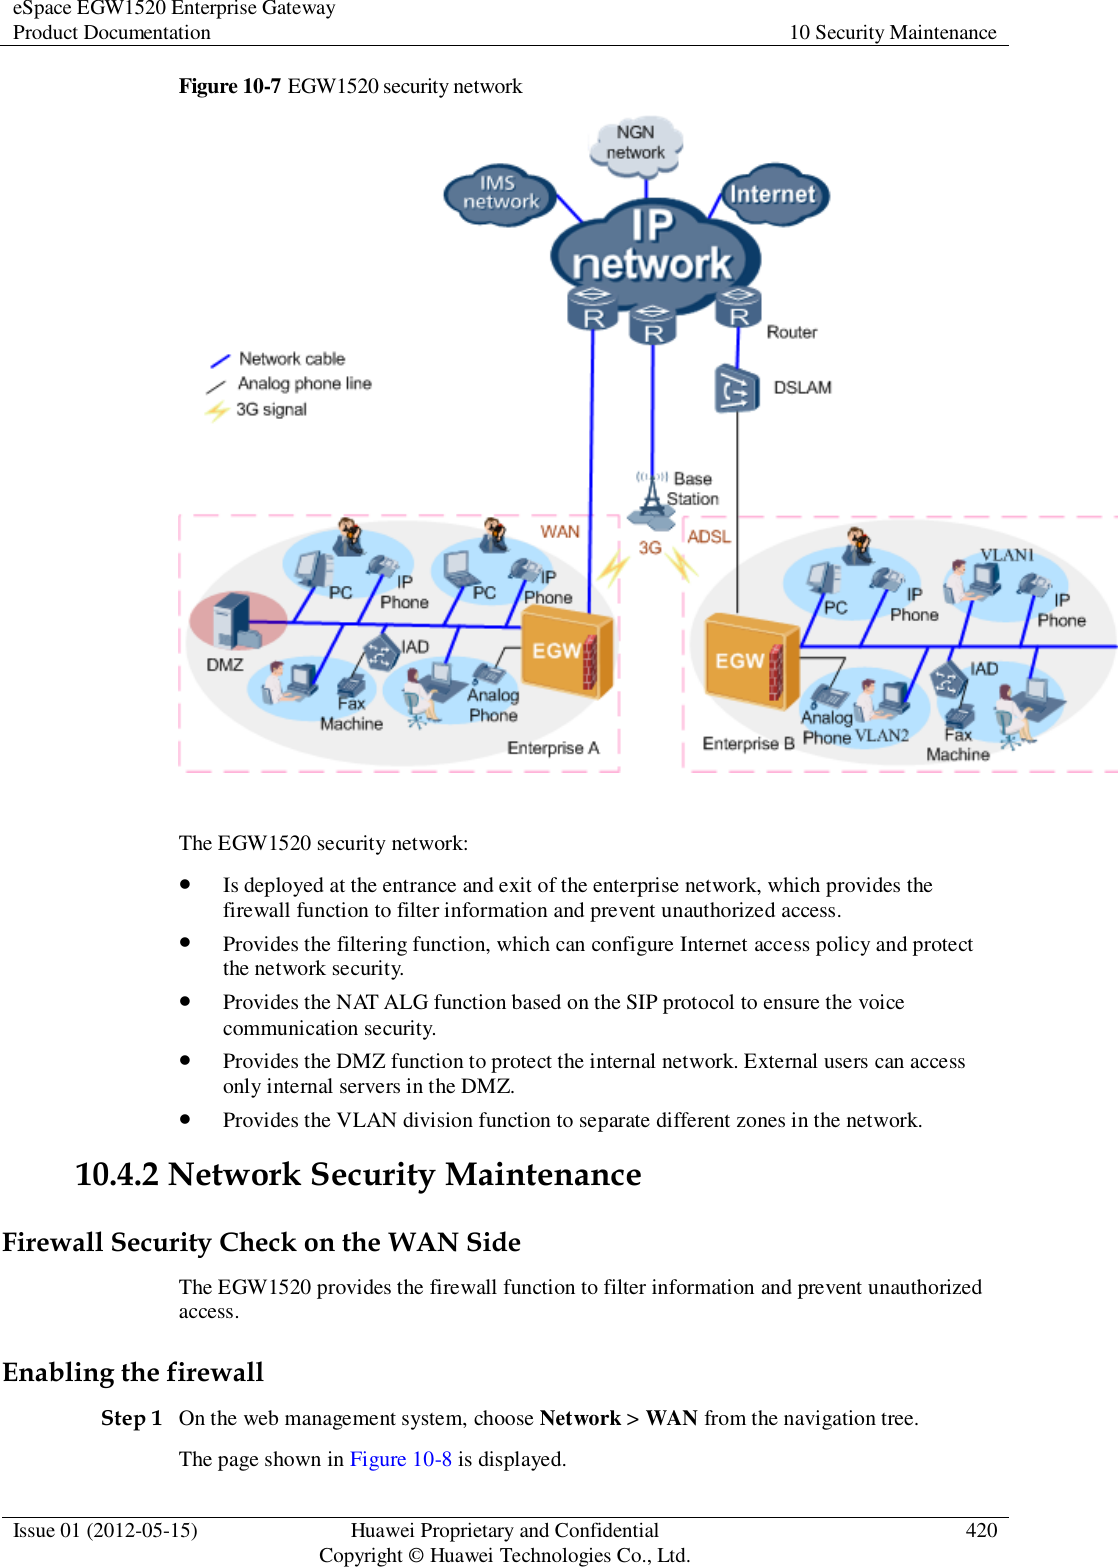 eSpace EGW1520 Enterprise Gateway Product Documentation 10 Security Maintenance  Issue 01 (2012-05-15) Huawei Proprietary and Confidential                                     Copyright © Huawei Technologies Co., Ltd. 420  Figure 10-7 EGW1520 security network   The EGW1520 security network:  Is deployed at the entrance and exit of the enterprise network, which provides the firewall function to filter information and prevent unauthorized access.  Provides the filtering function, which can configure Internet access policy and protect the network security.  Provides the NAT ALG function based on the SIP protocol to ensure the voice communication security.  Provides the DMZ function to protect the internal network. External users can access only internal servers in the DMZ.  Provides the VLAN division function to separate different zones in the network. 10.4.2 Network Security Maintenance Firewall Security Check on the WAN Side The EGW1520 provides the firewall function to filter information and prevent unauthorized access. Enabling the firewall Step 1 On the web management system, choose Network &gt; WAN from the navigation tree. The page shown in Figure 10-8 is displayed. 